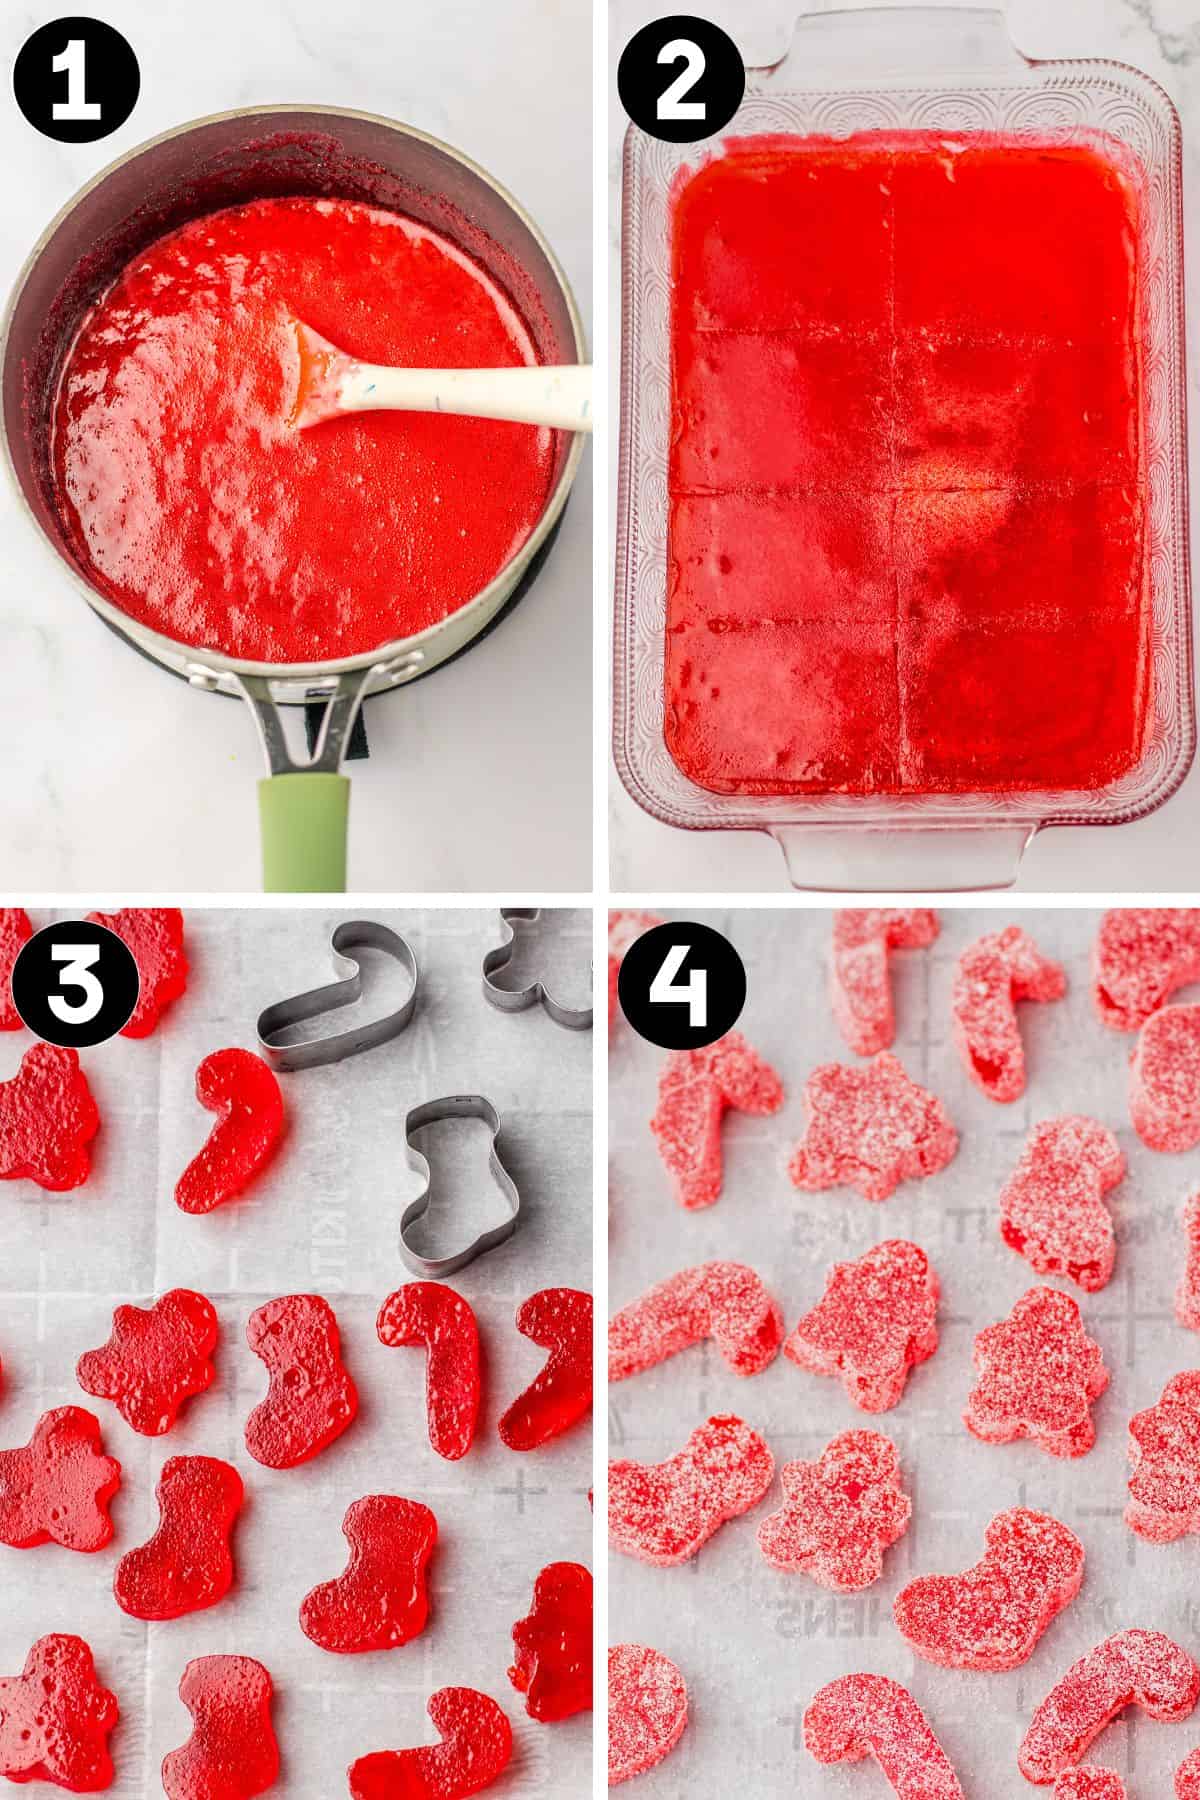 Four image collage of 1: red mixture in a saucepan, 2: red gelatin layer in rectangular glass baking dish, 3: red gumdops being cut with metal cookie cutters, and 4: the red gumdrops coated in sugar.